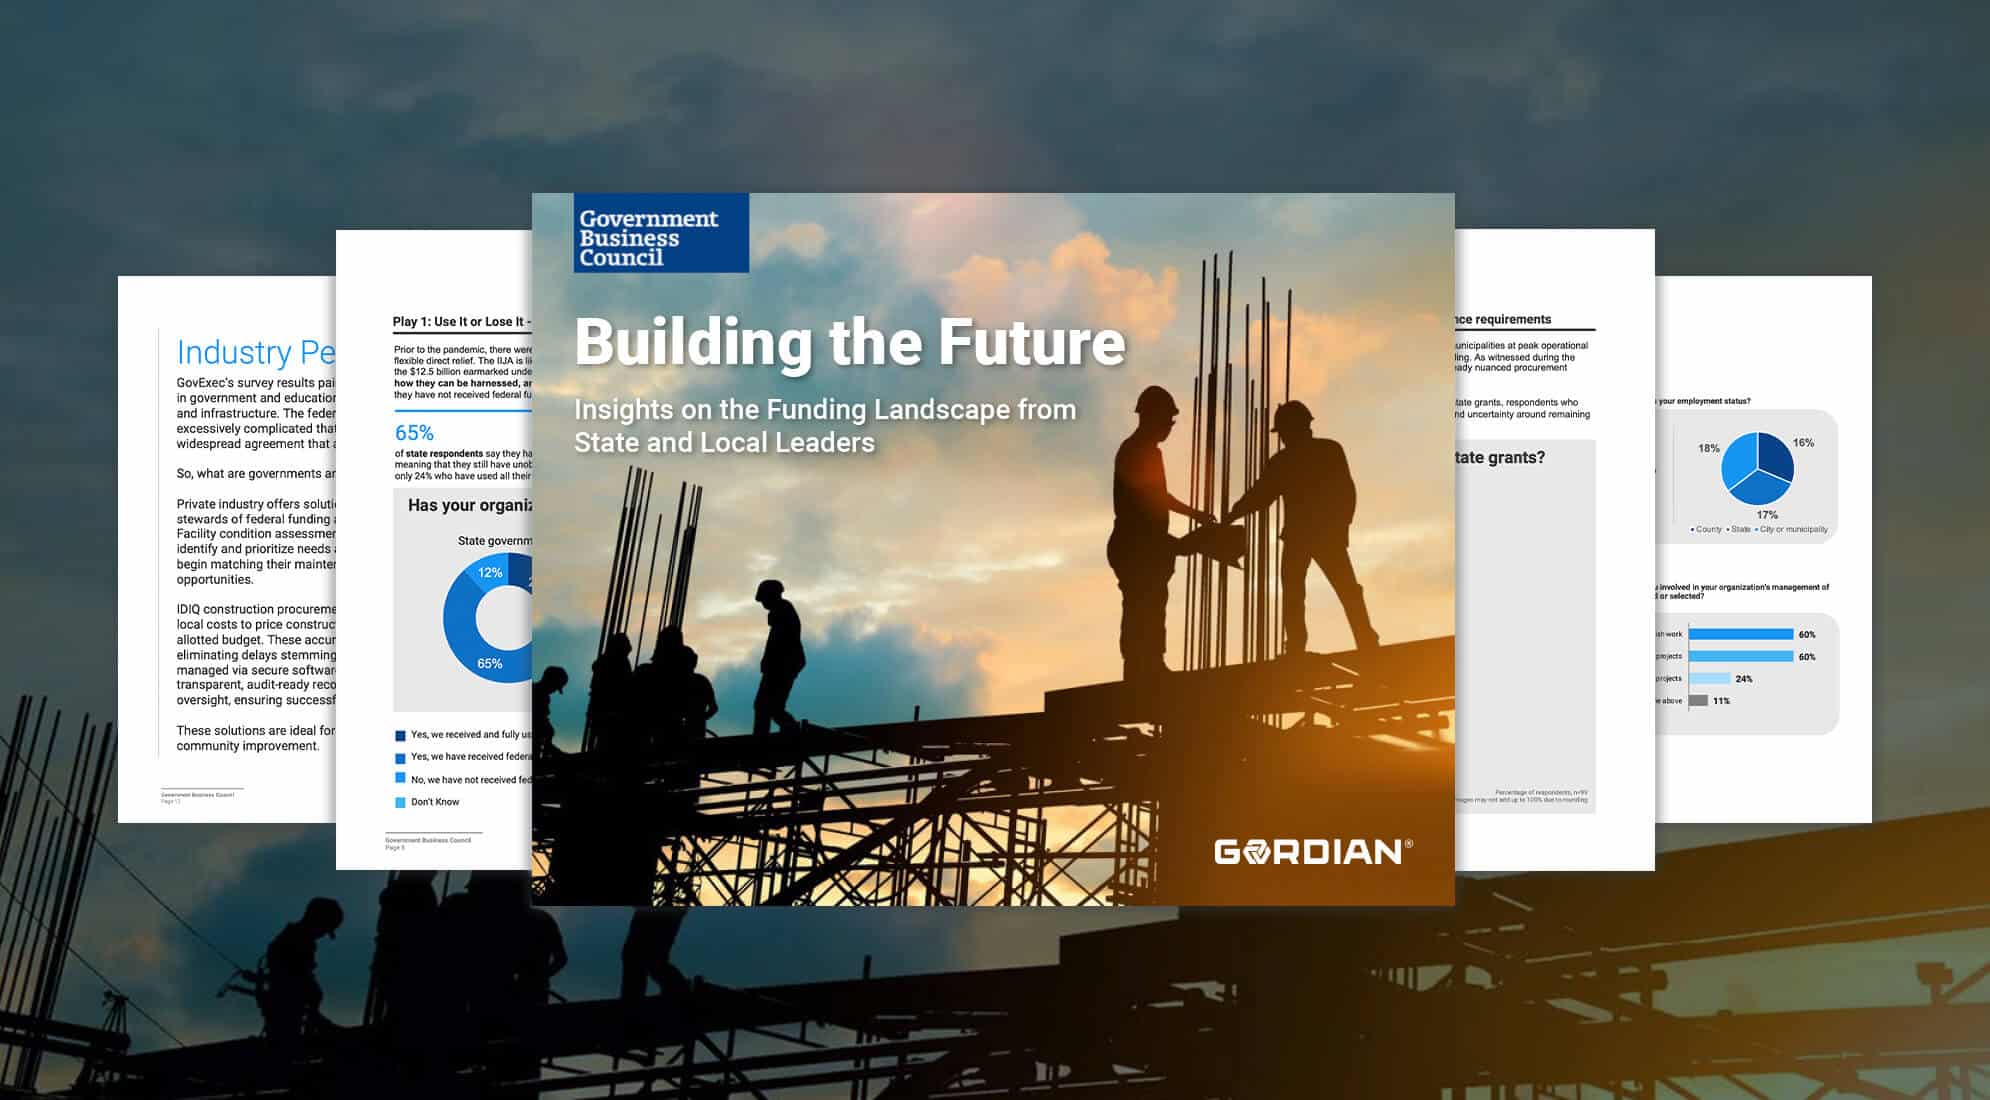 Building the Future: What Public Sector Leaders Say About Using State and Federal Aid 4